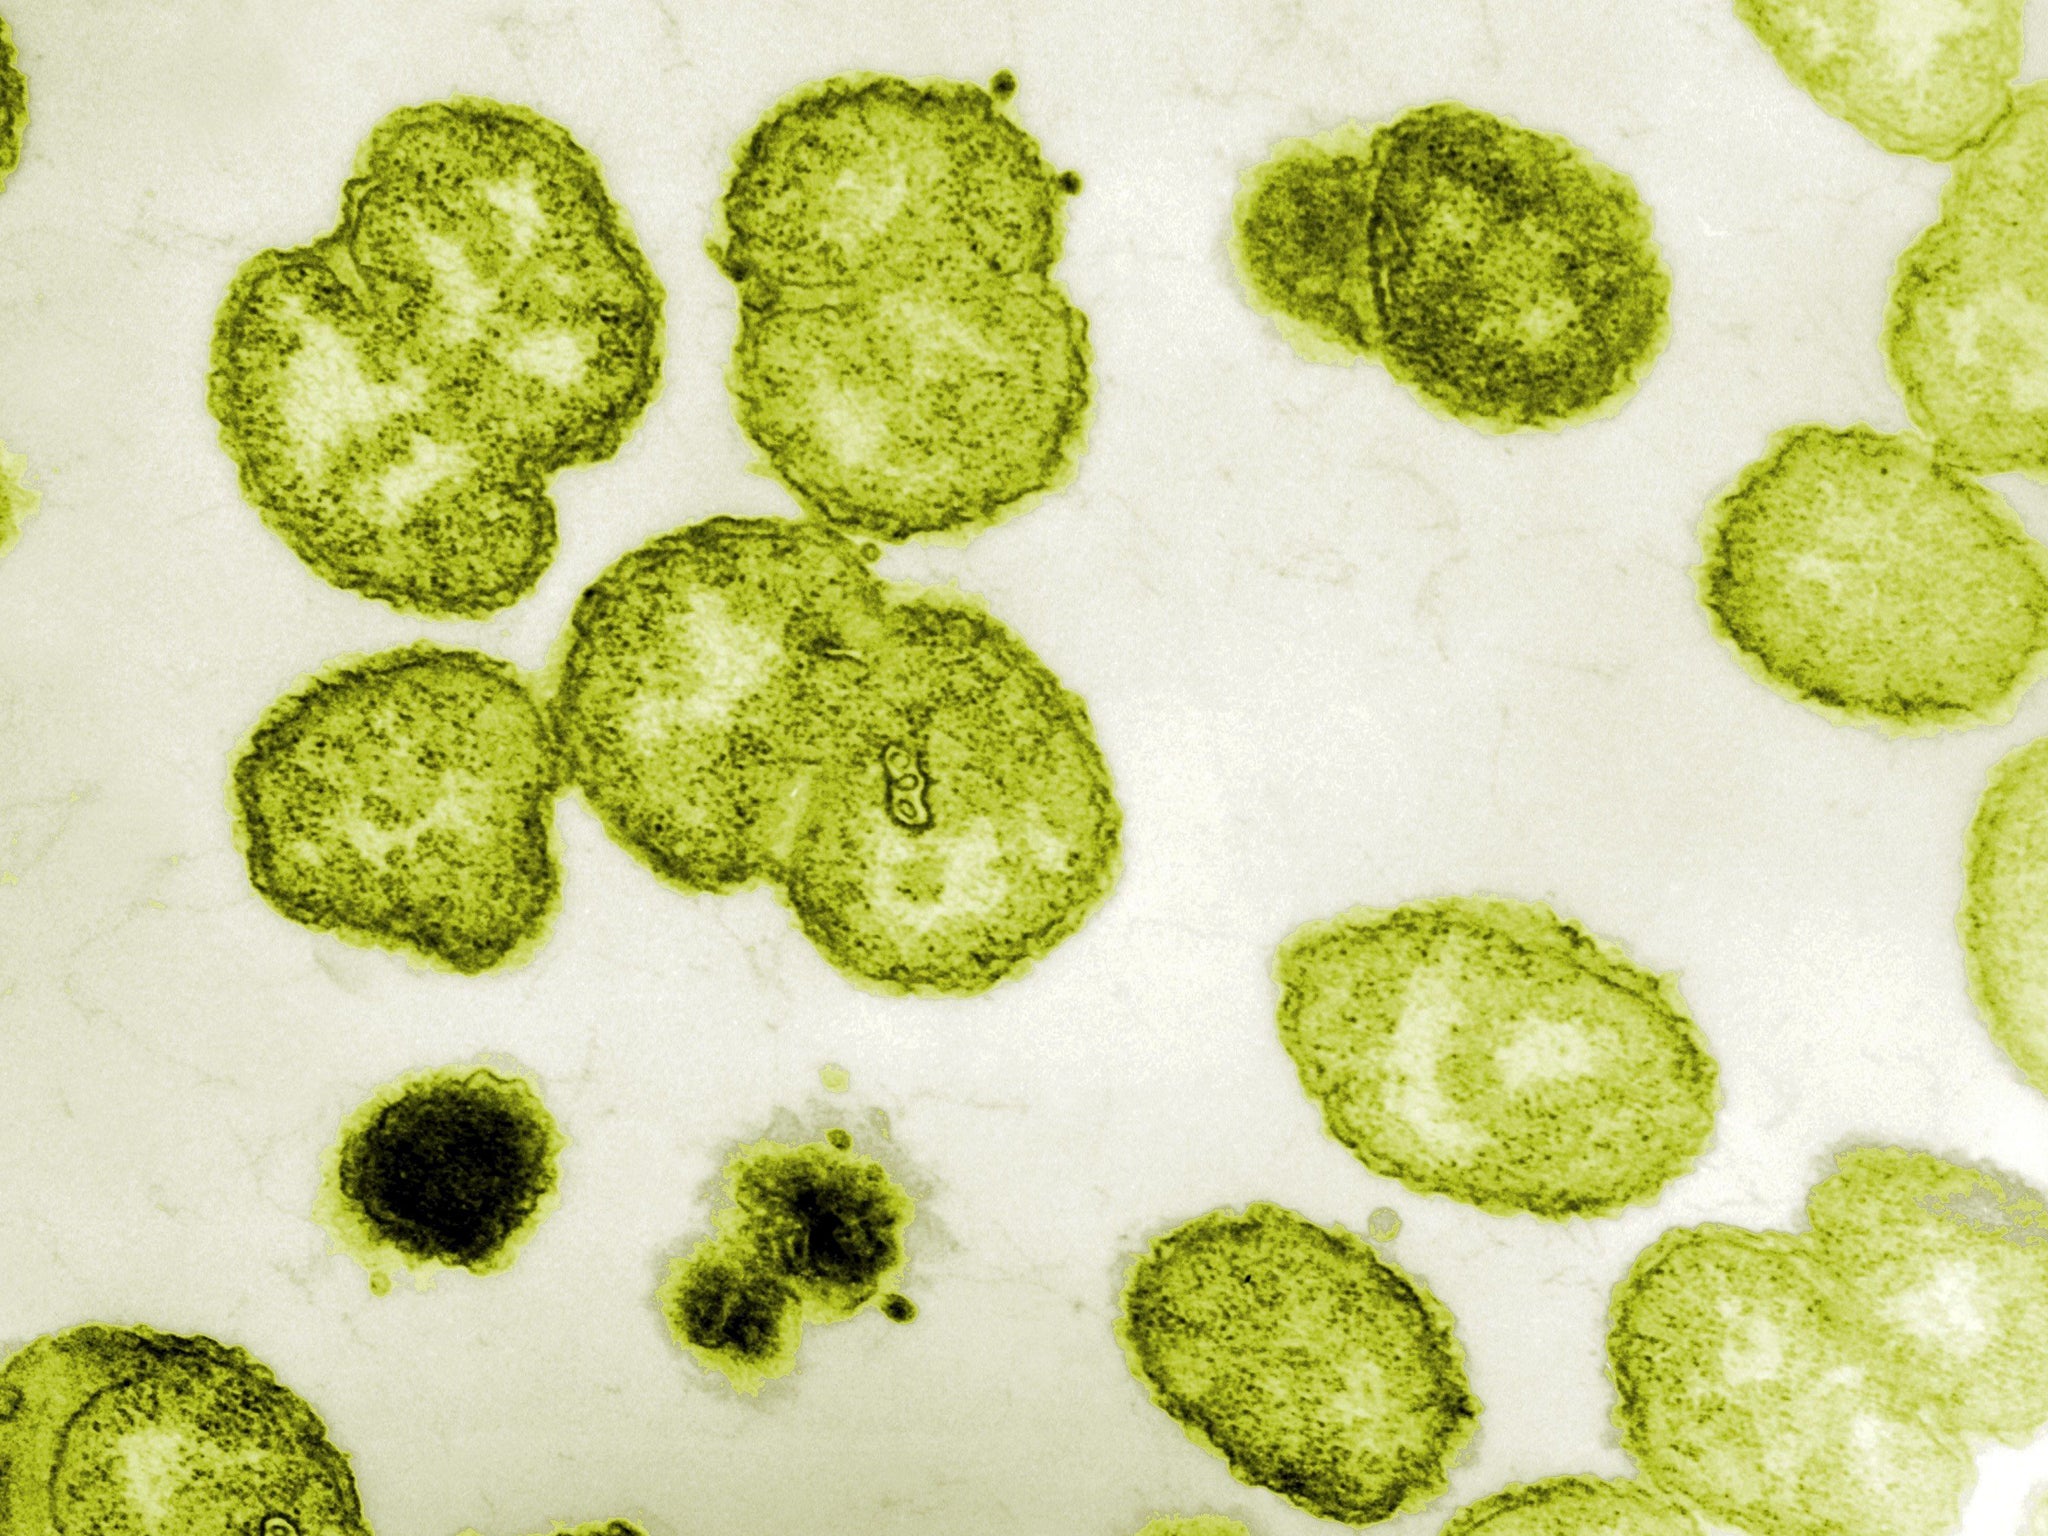 Electron micrograph of Neisseria gonorrhoeae, the aerobic Gram-negative bacterium responsible for the Sexually transmitted infection